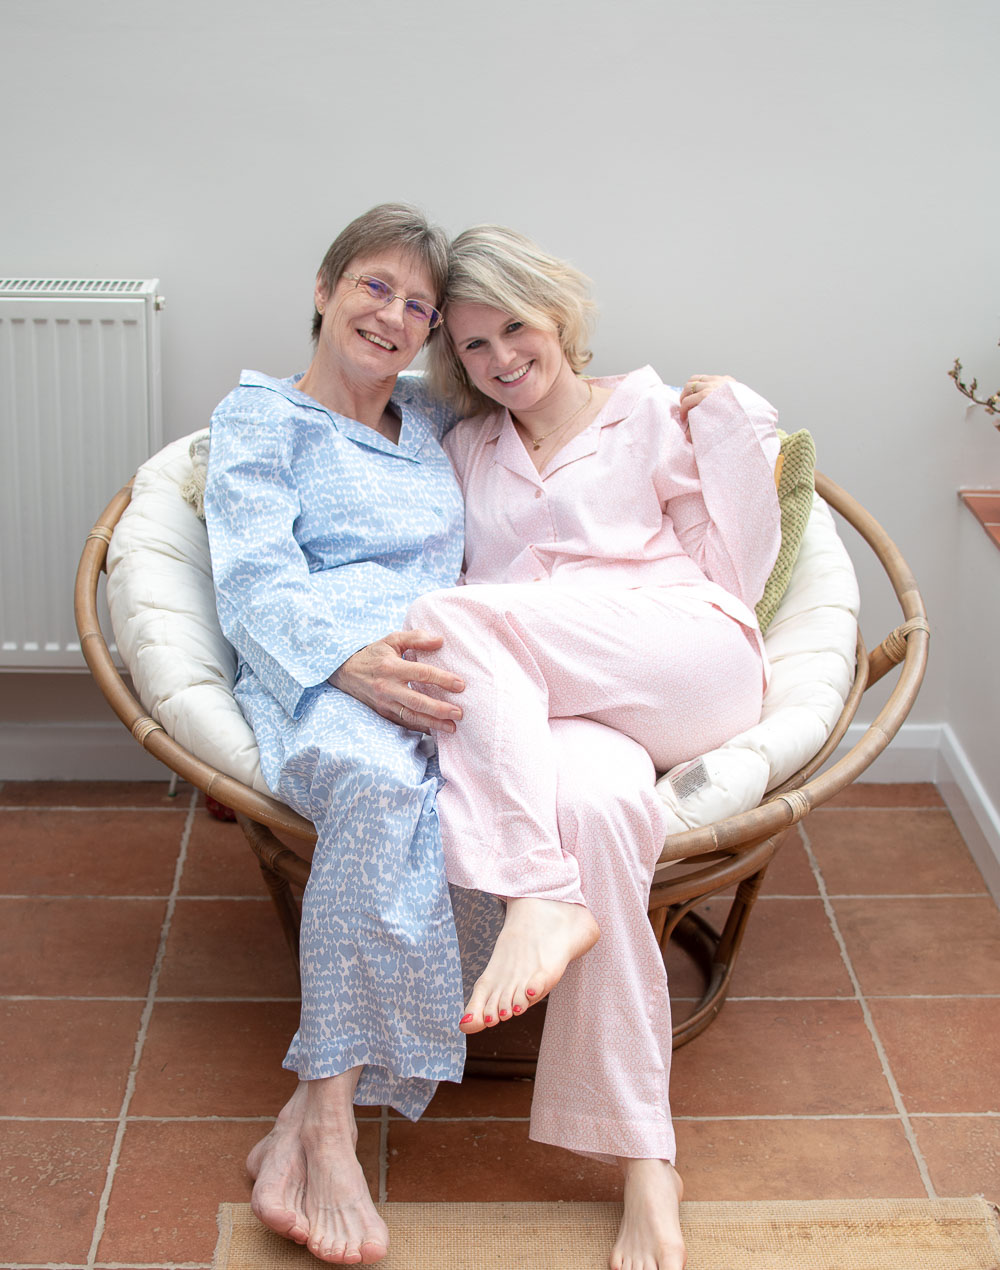 Karen Maurice of n4mummy and her mum wear pjs from Yawn, sustainable Mother's Day gifts